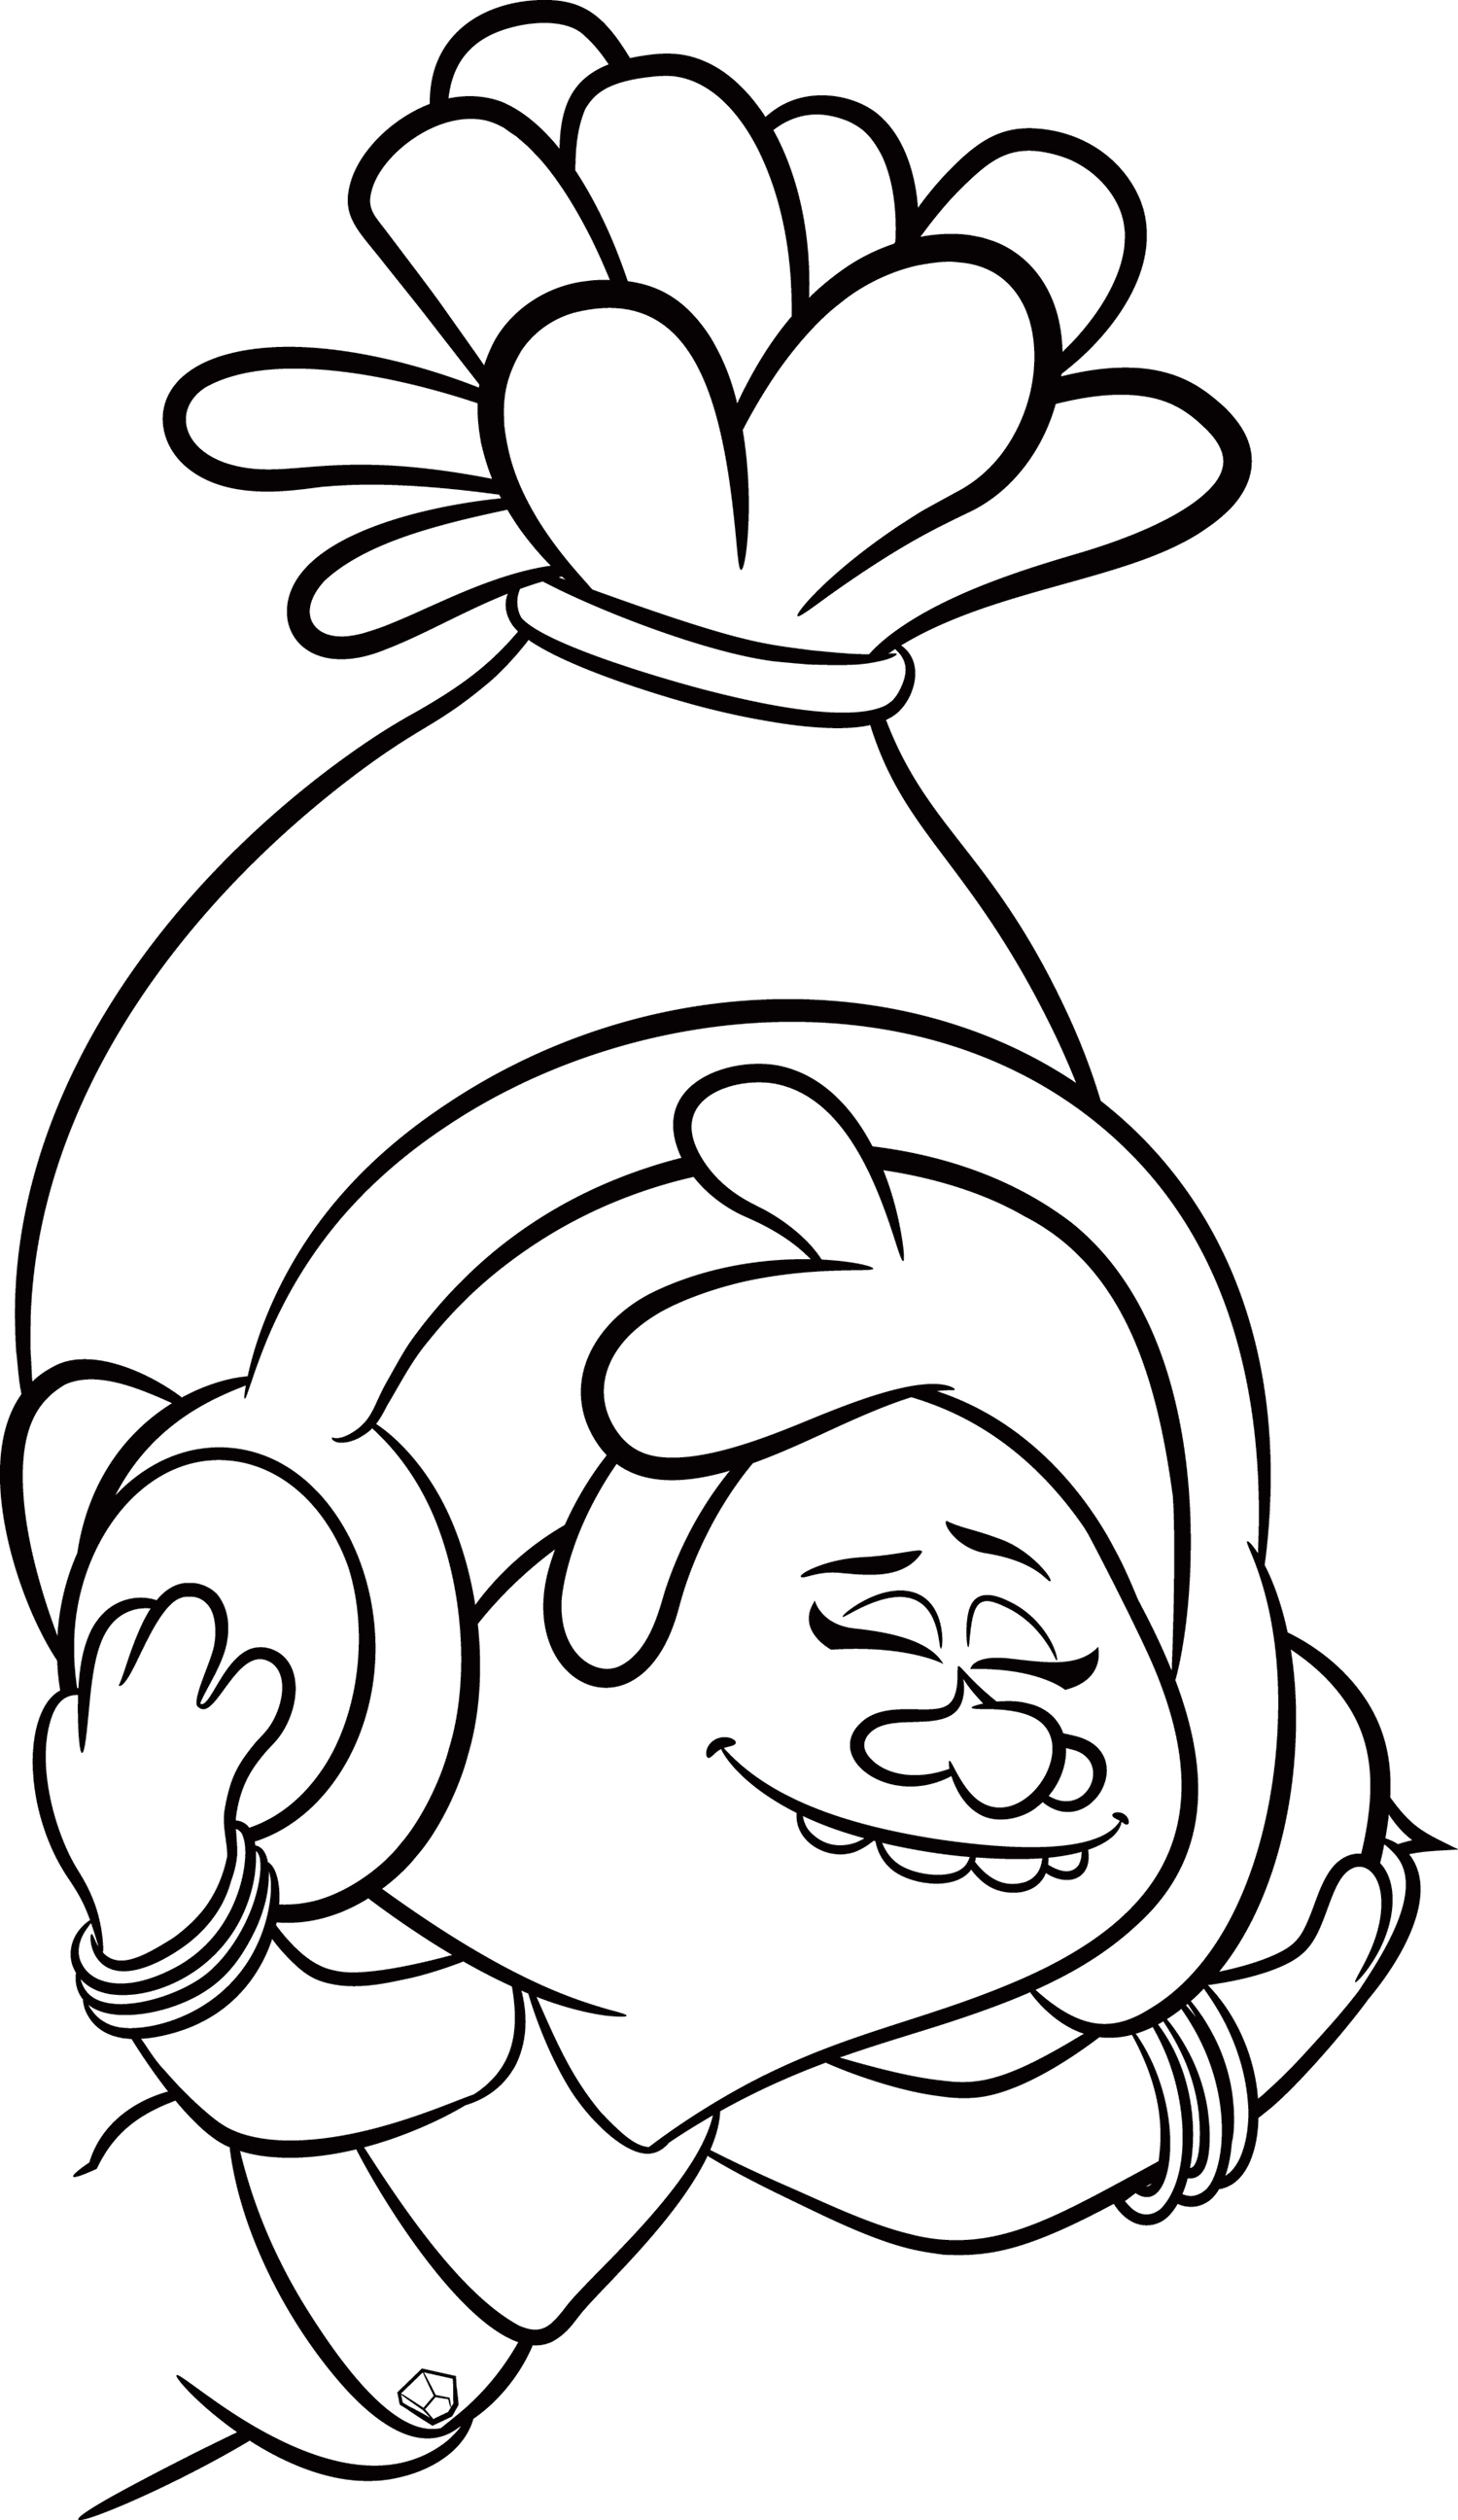 free coloring pages trolls trolls movie coloring pages best coloring pages for kids pages trolls coloring free 